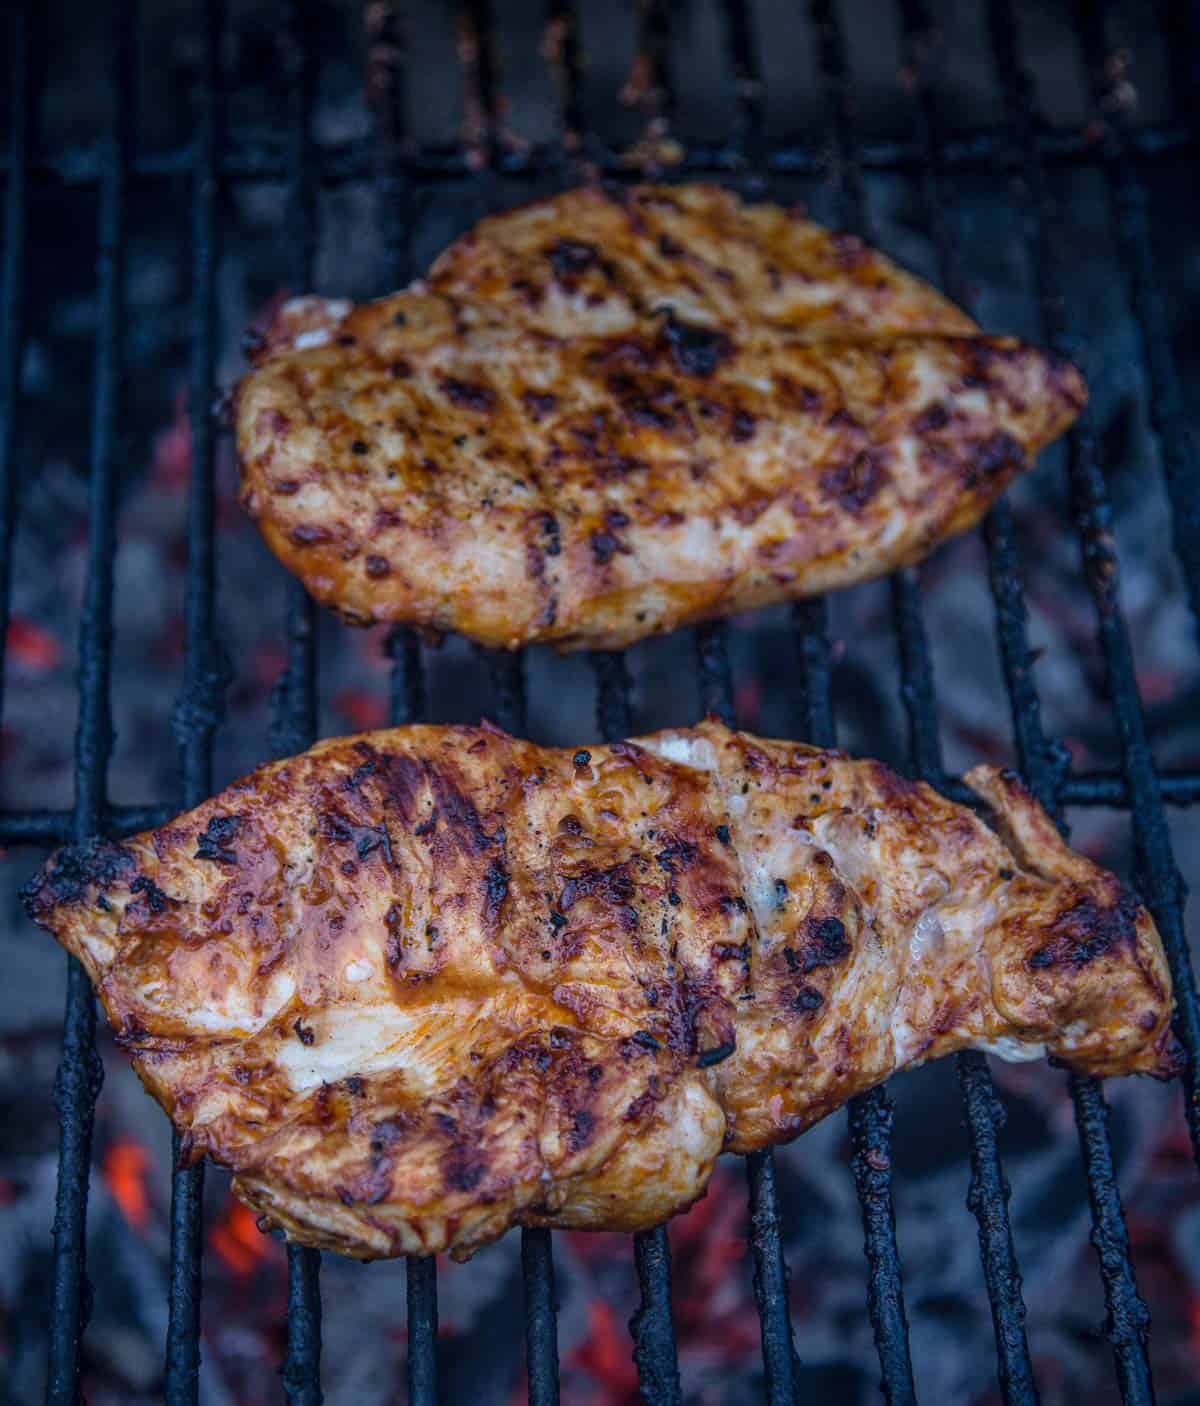 Two marinated chicken breasts cooking on a hot grill